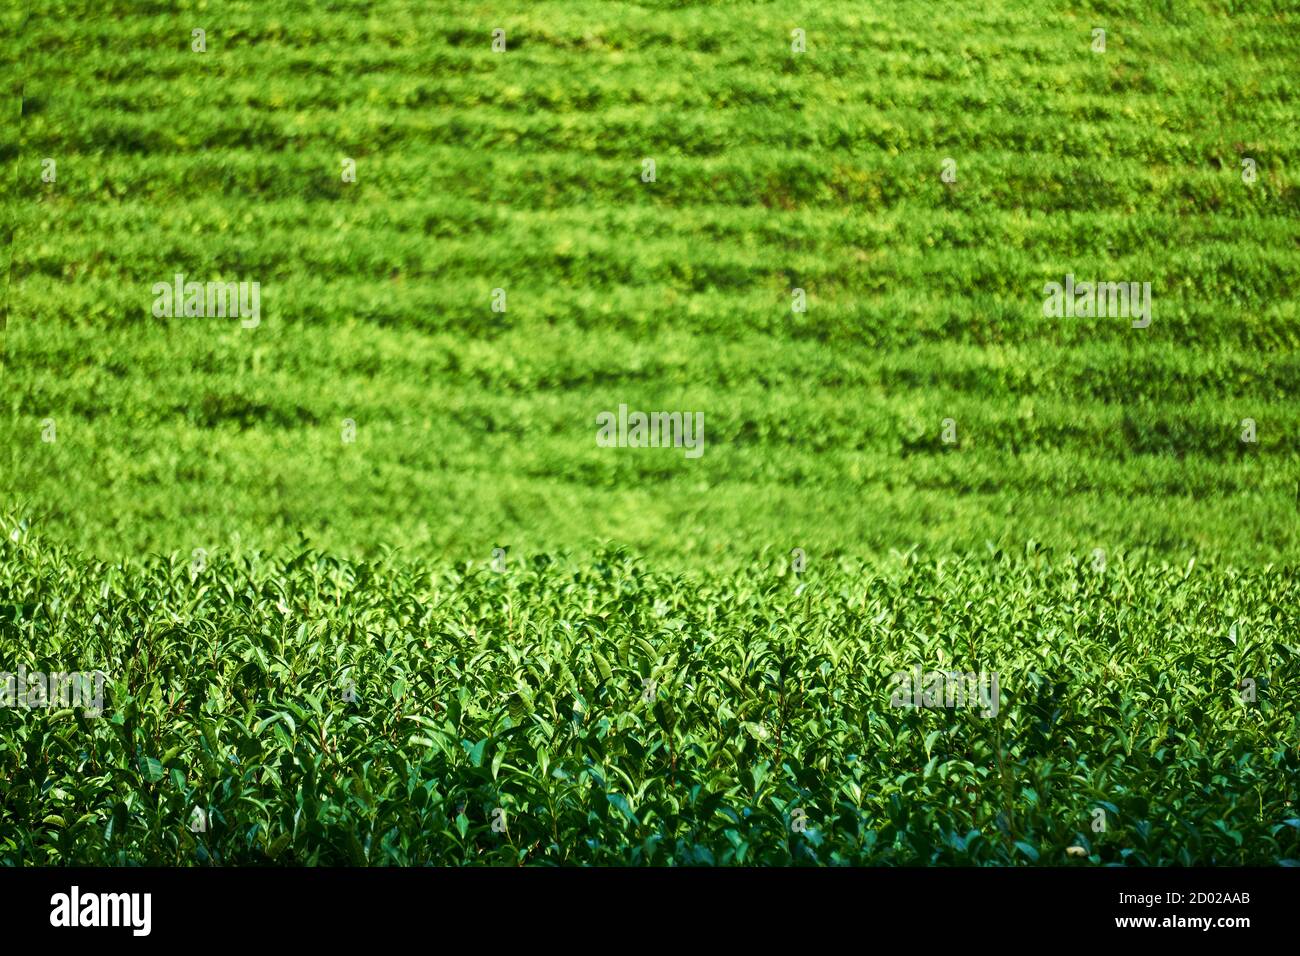 view of a tea plantation, front bushes in focus, background with rows of plants is blurred Stock Photo